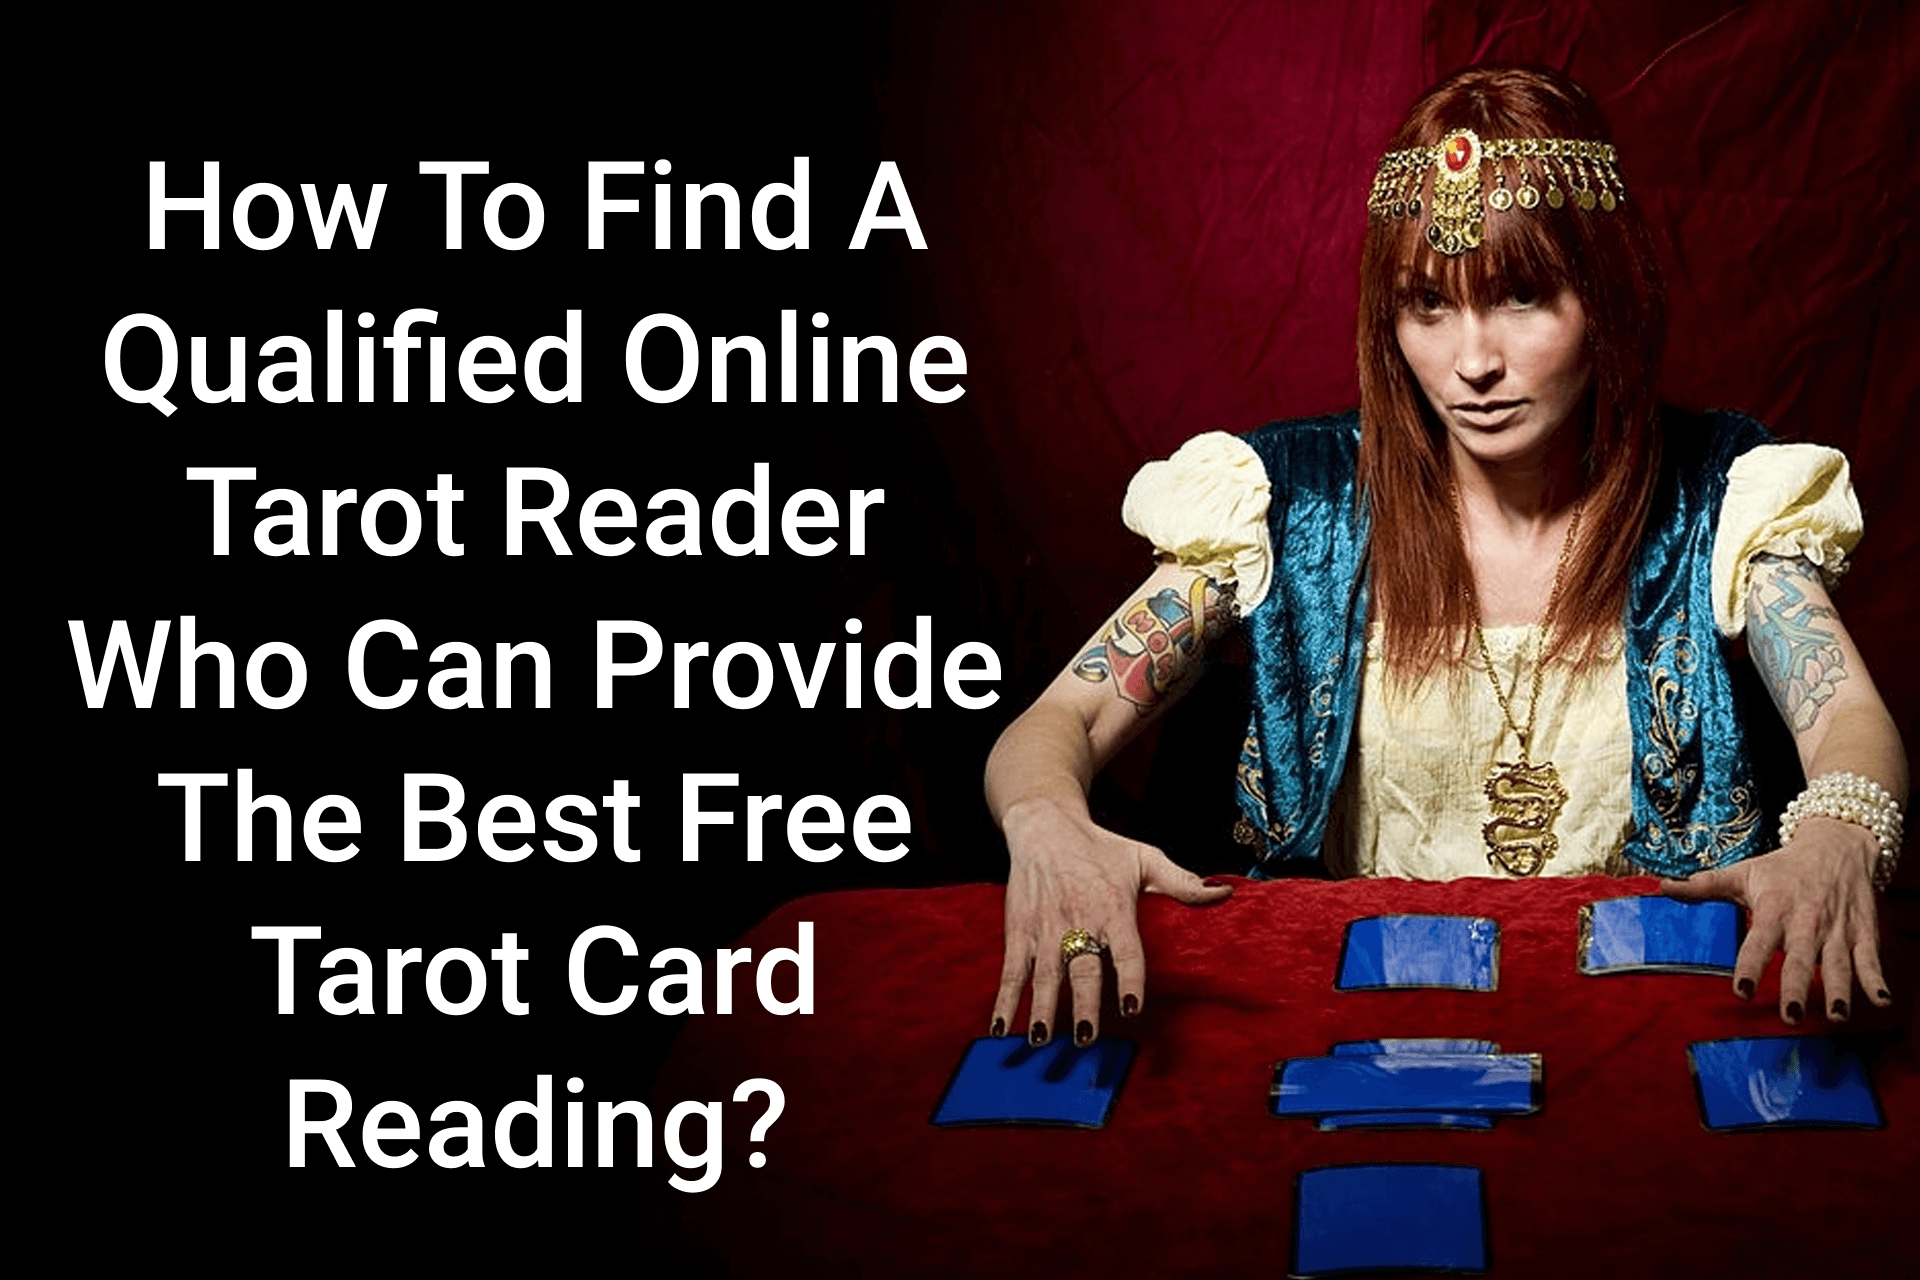 How to Find the Best Free Tarot Card Reading?